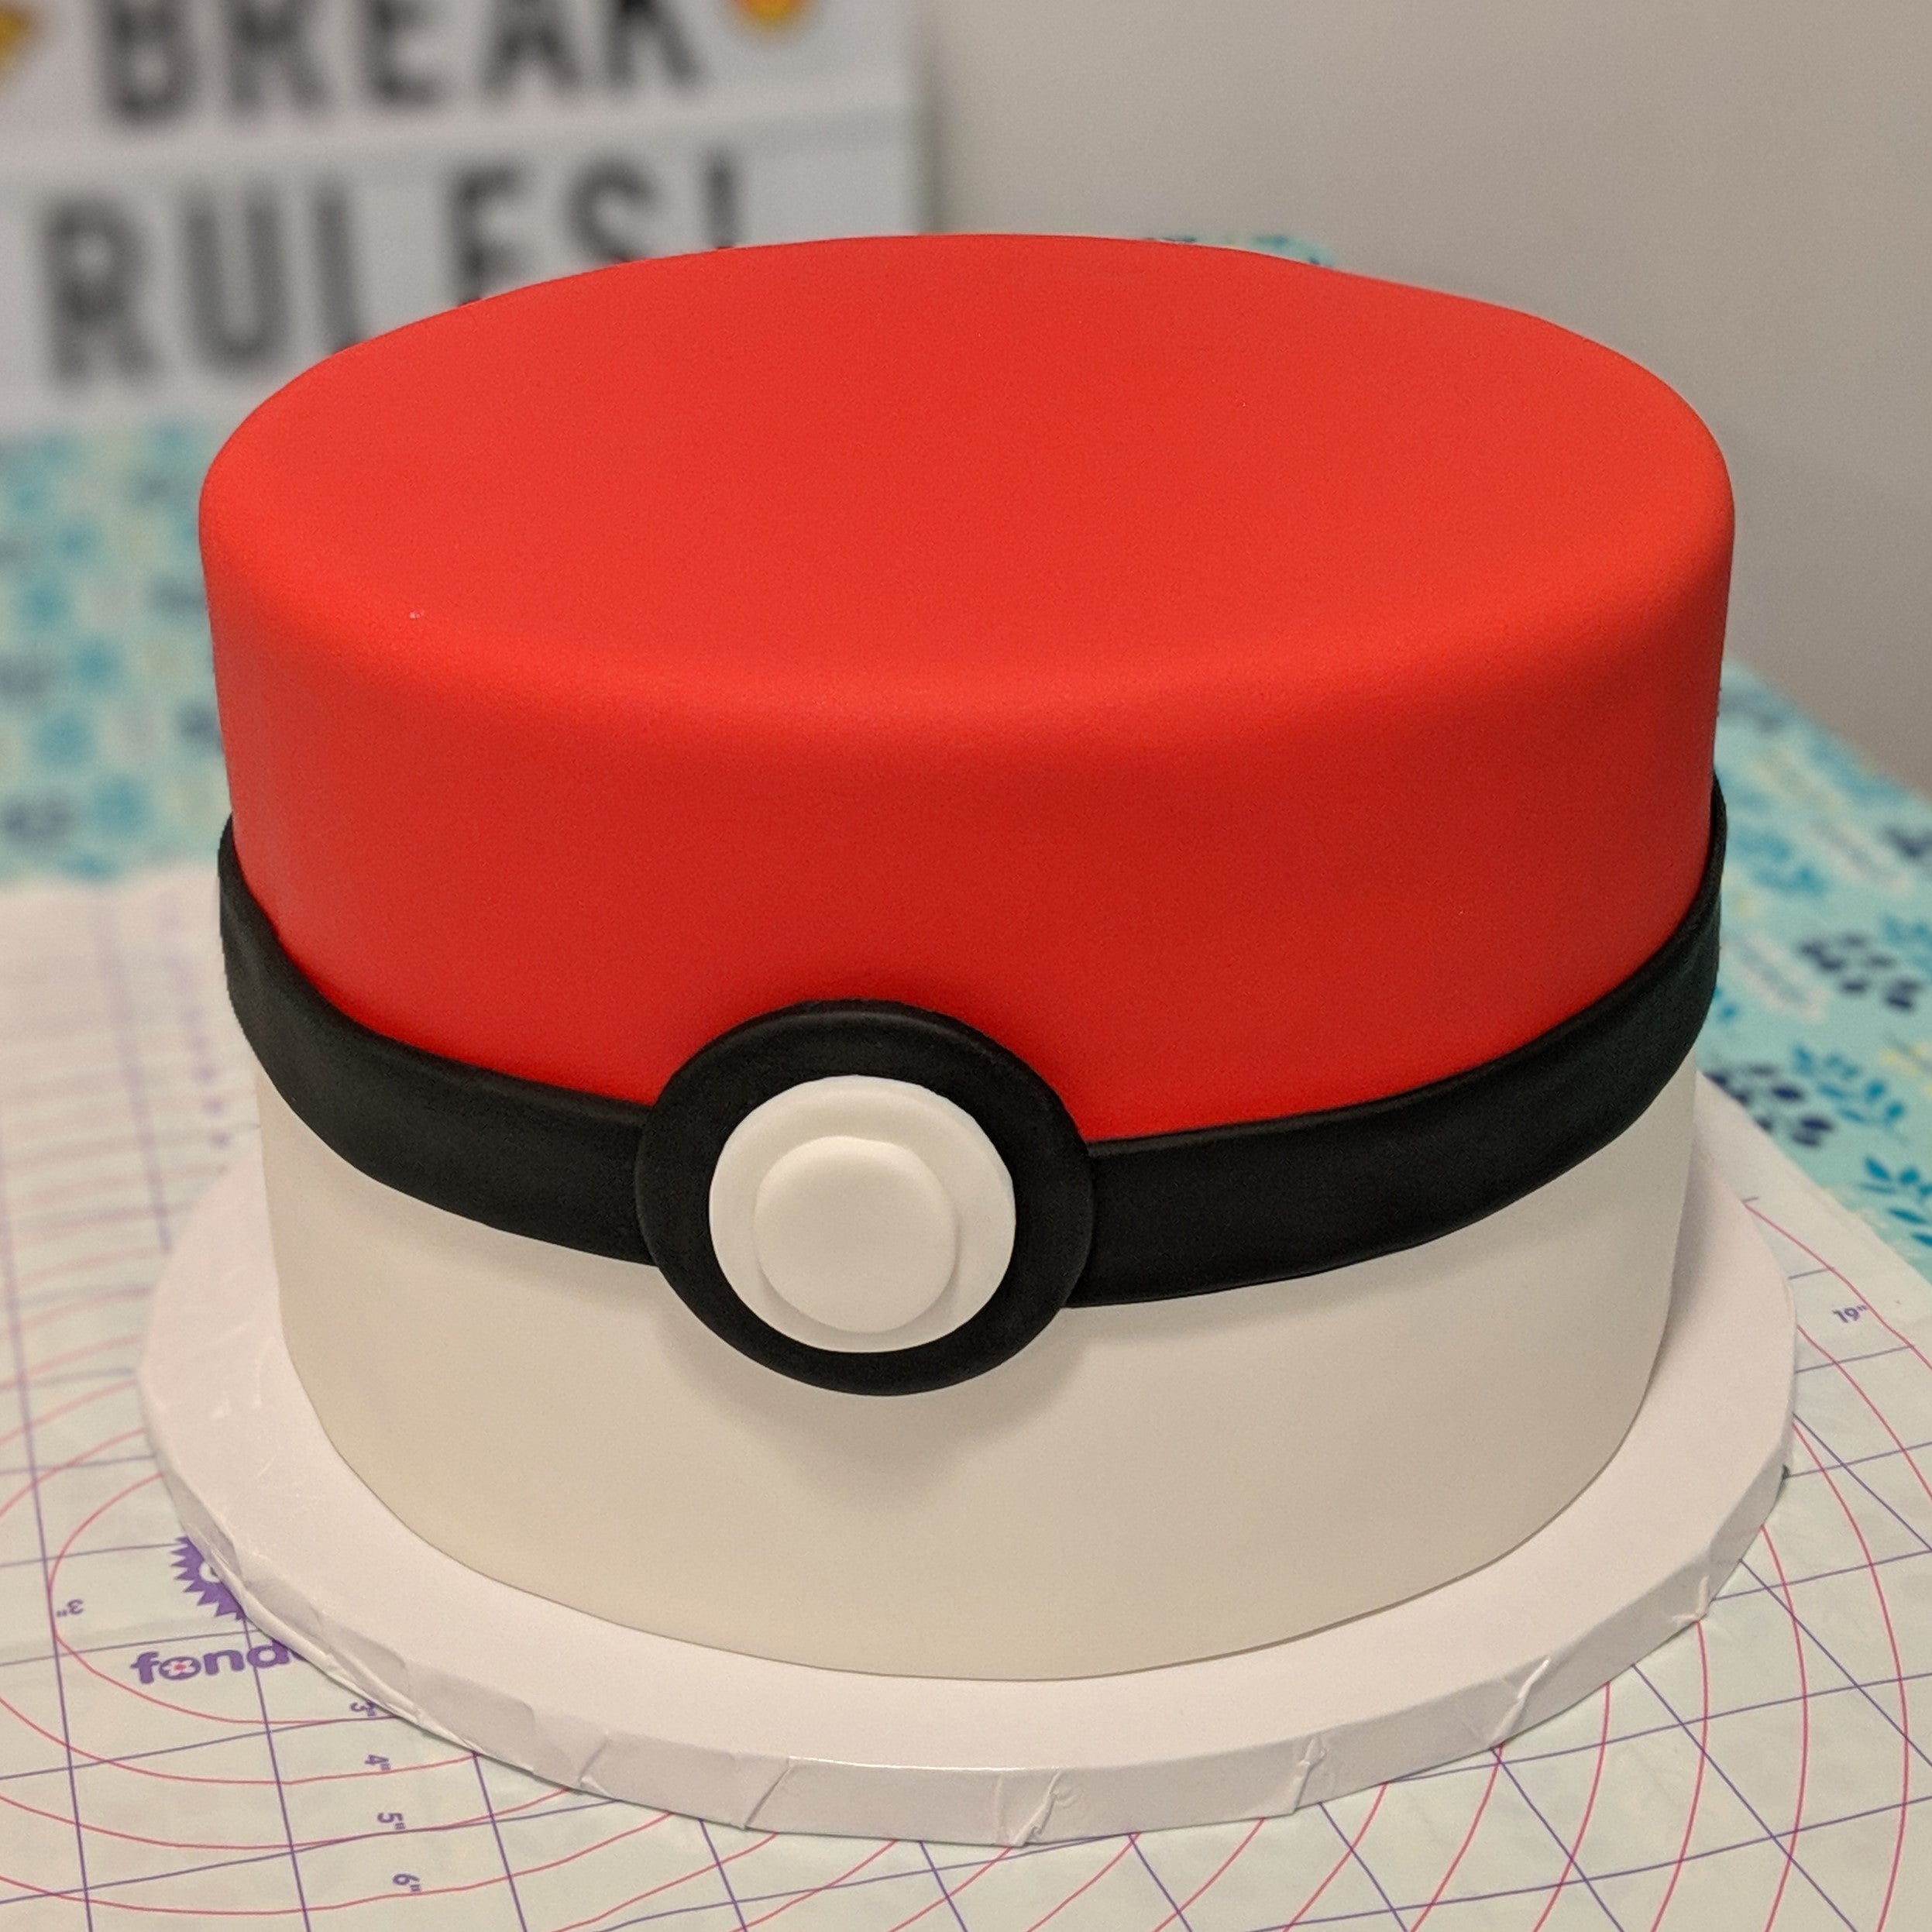 Pokeball Cake Recipe (For A Pokemon Themed Party)